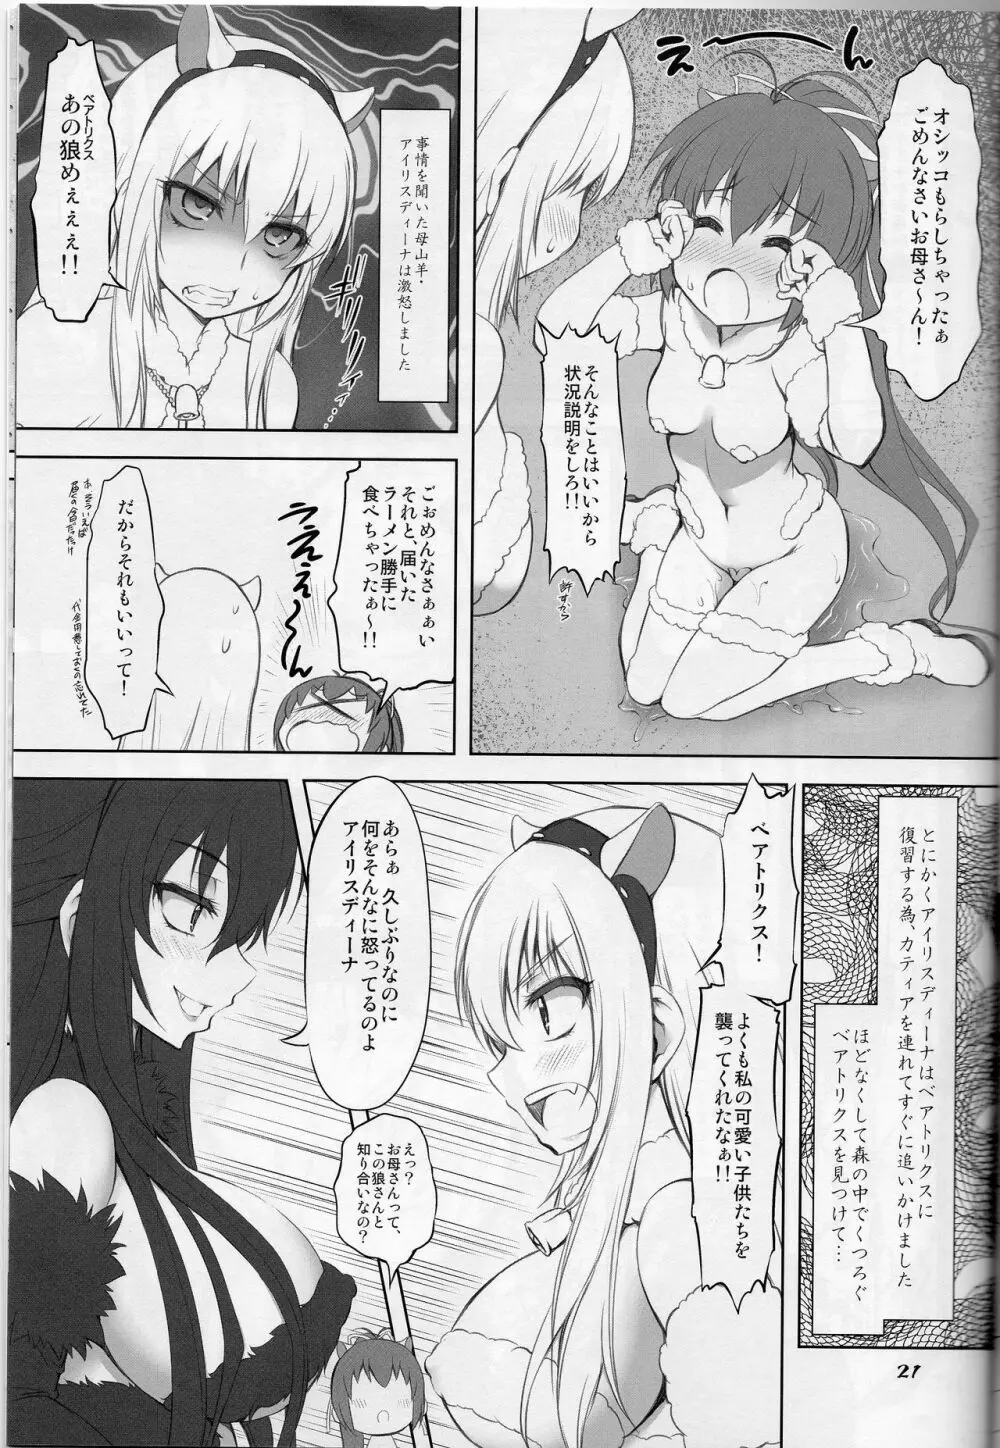 7Girls and wolf Page.22